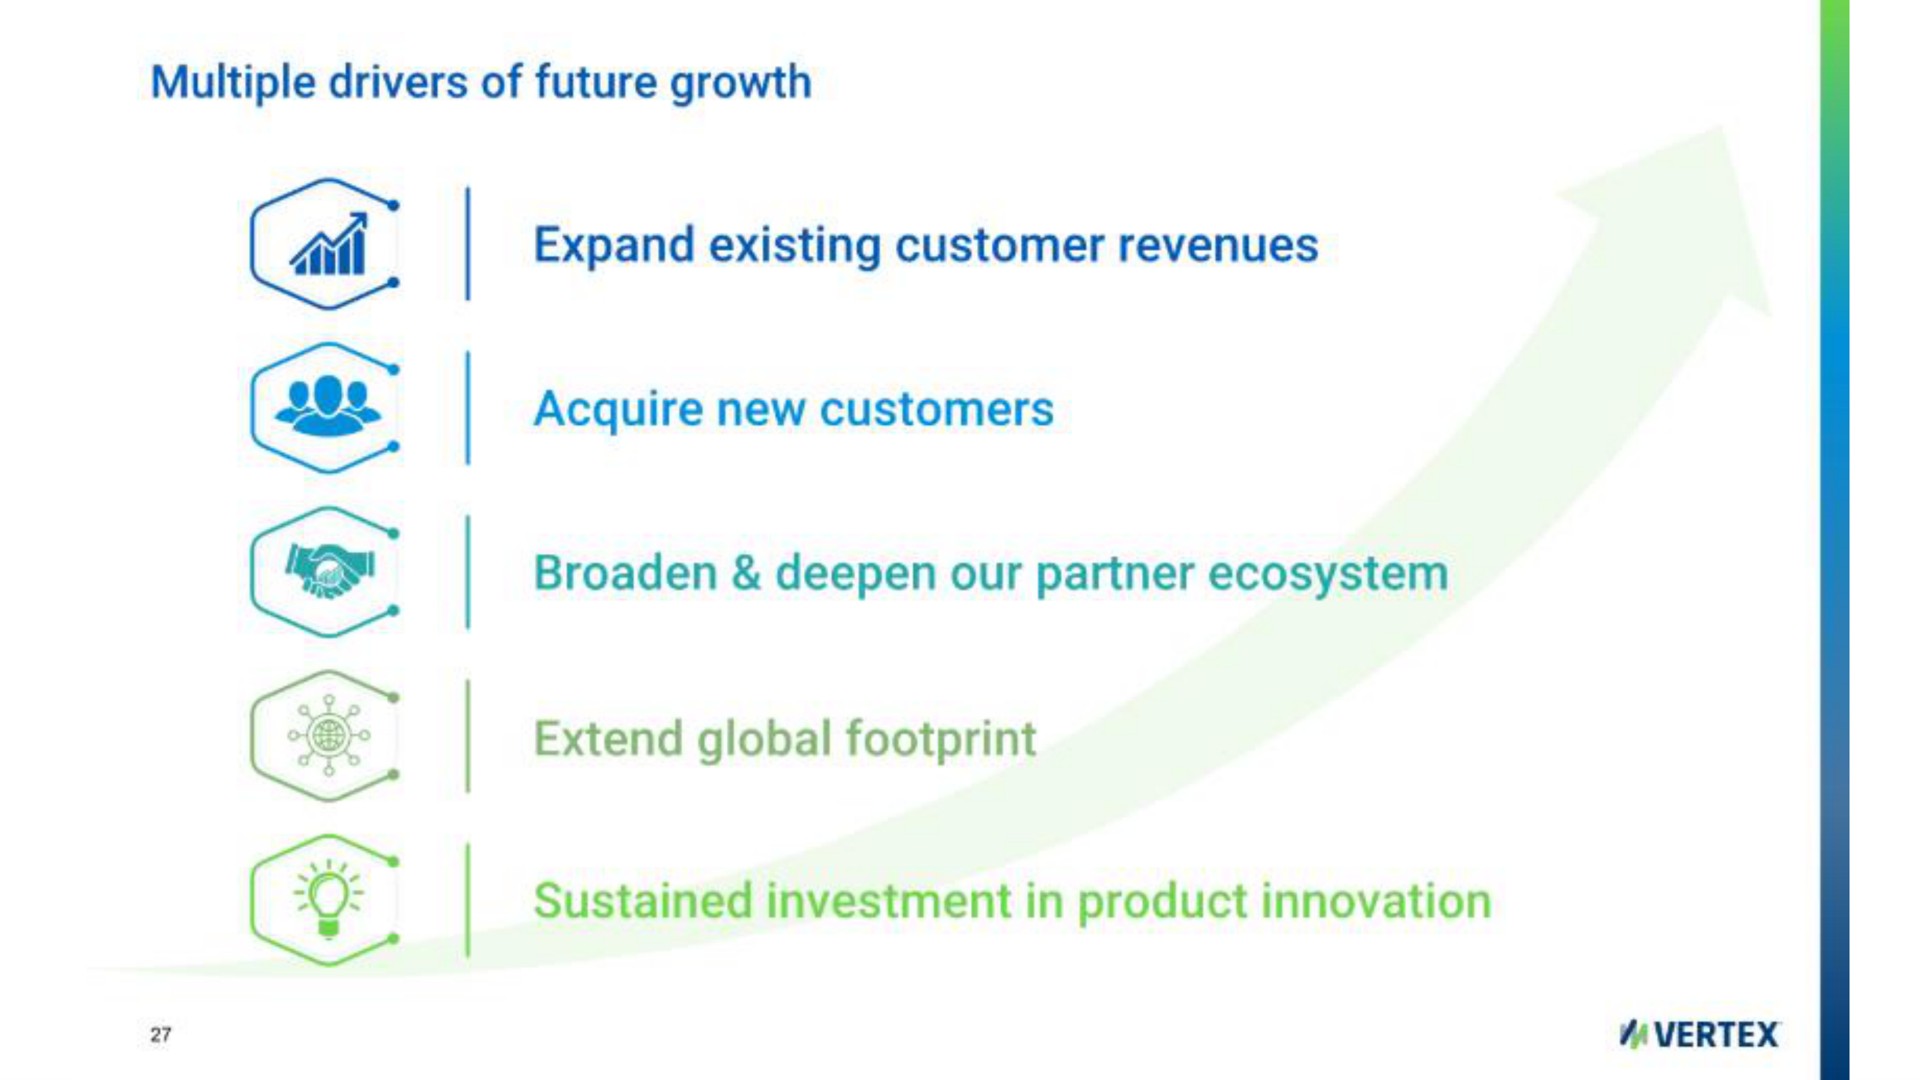 multiple drivers of future growth so expand existing customer revenues acquire new customers broaden deepen our partner ecosystem extend global footprint sustained investment in product innovation | Vertex